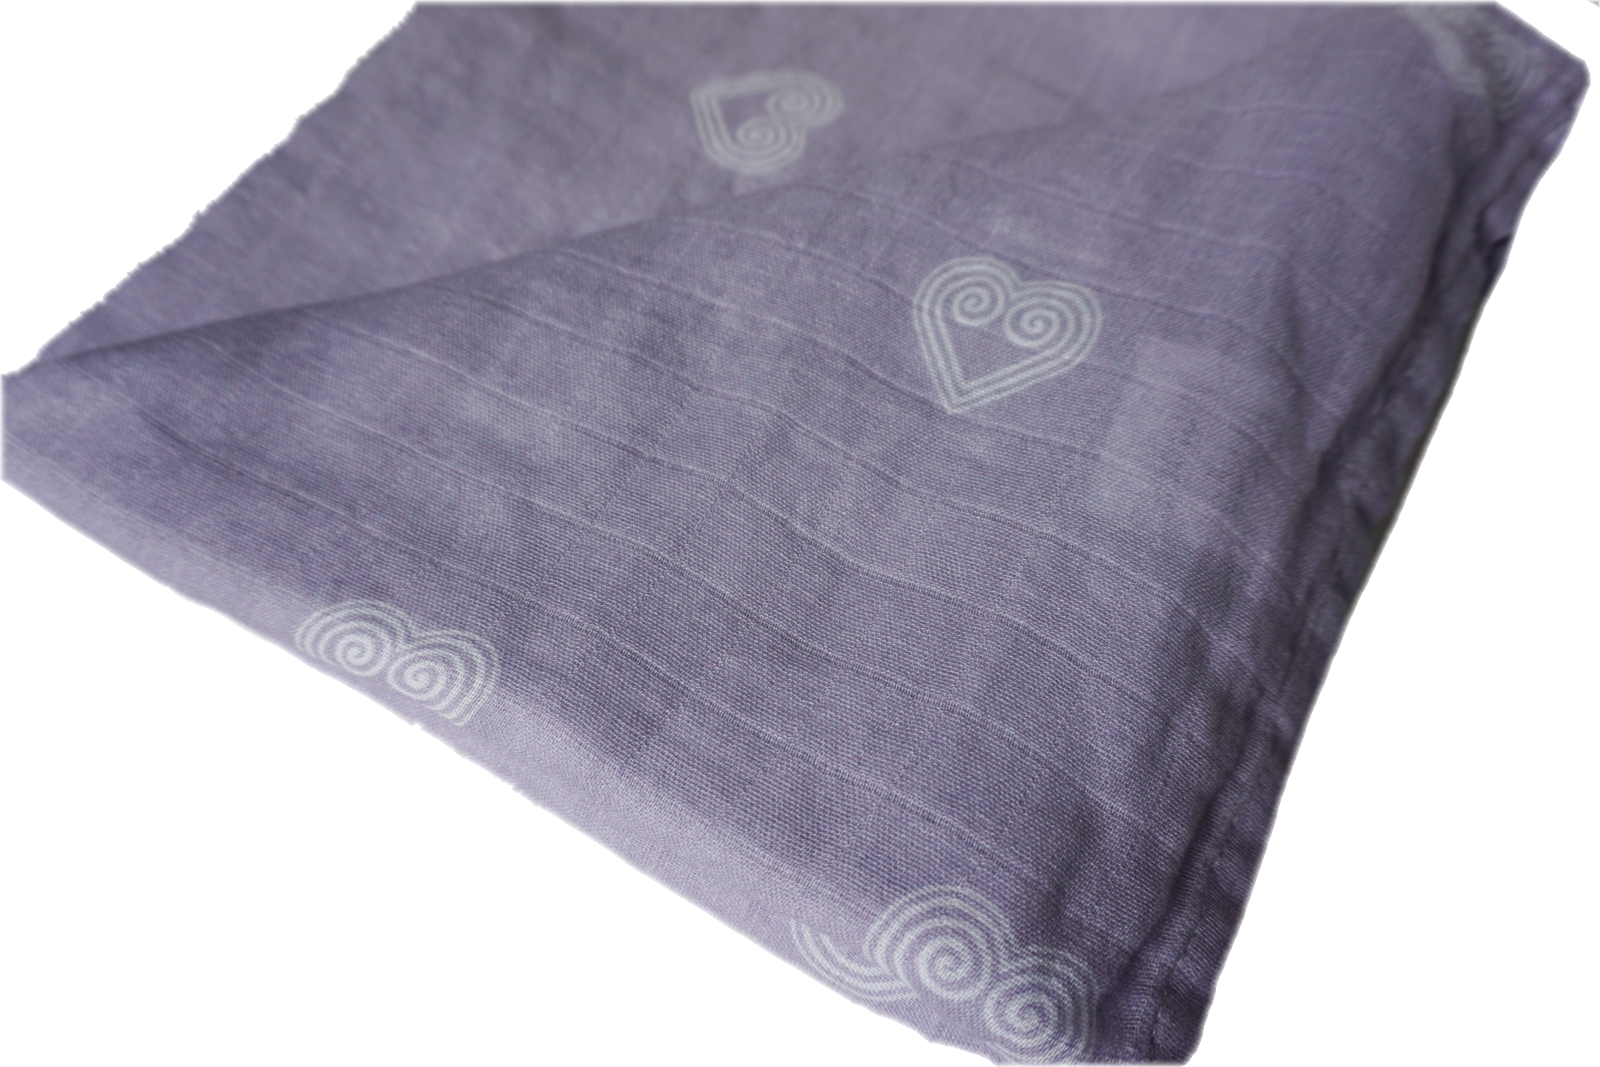 The lavender heart muslin swaddle is new for Spring 2022.